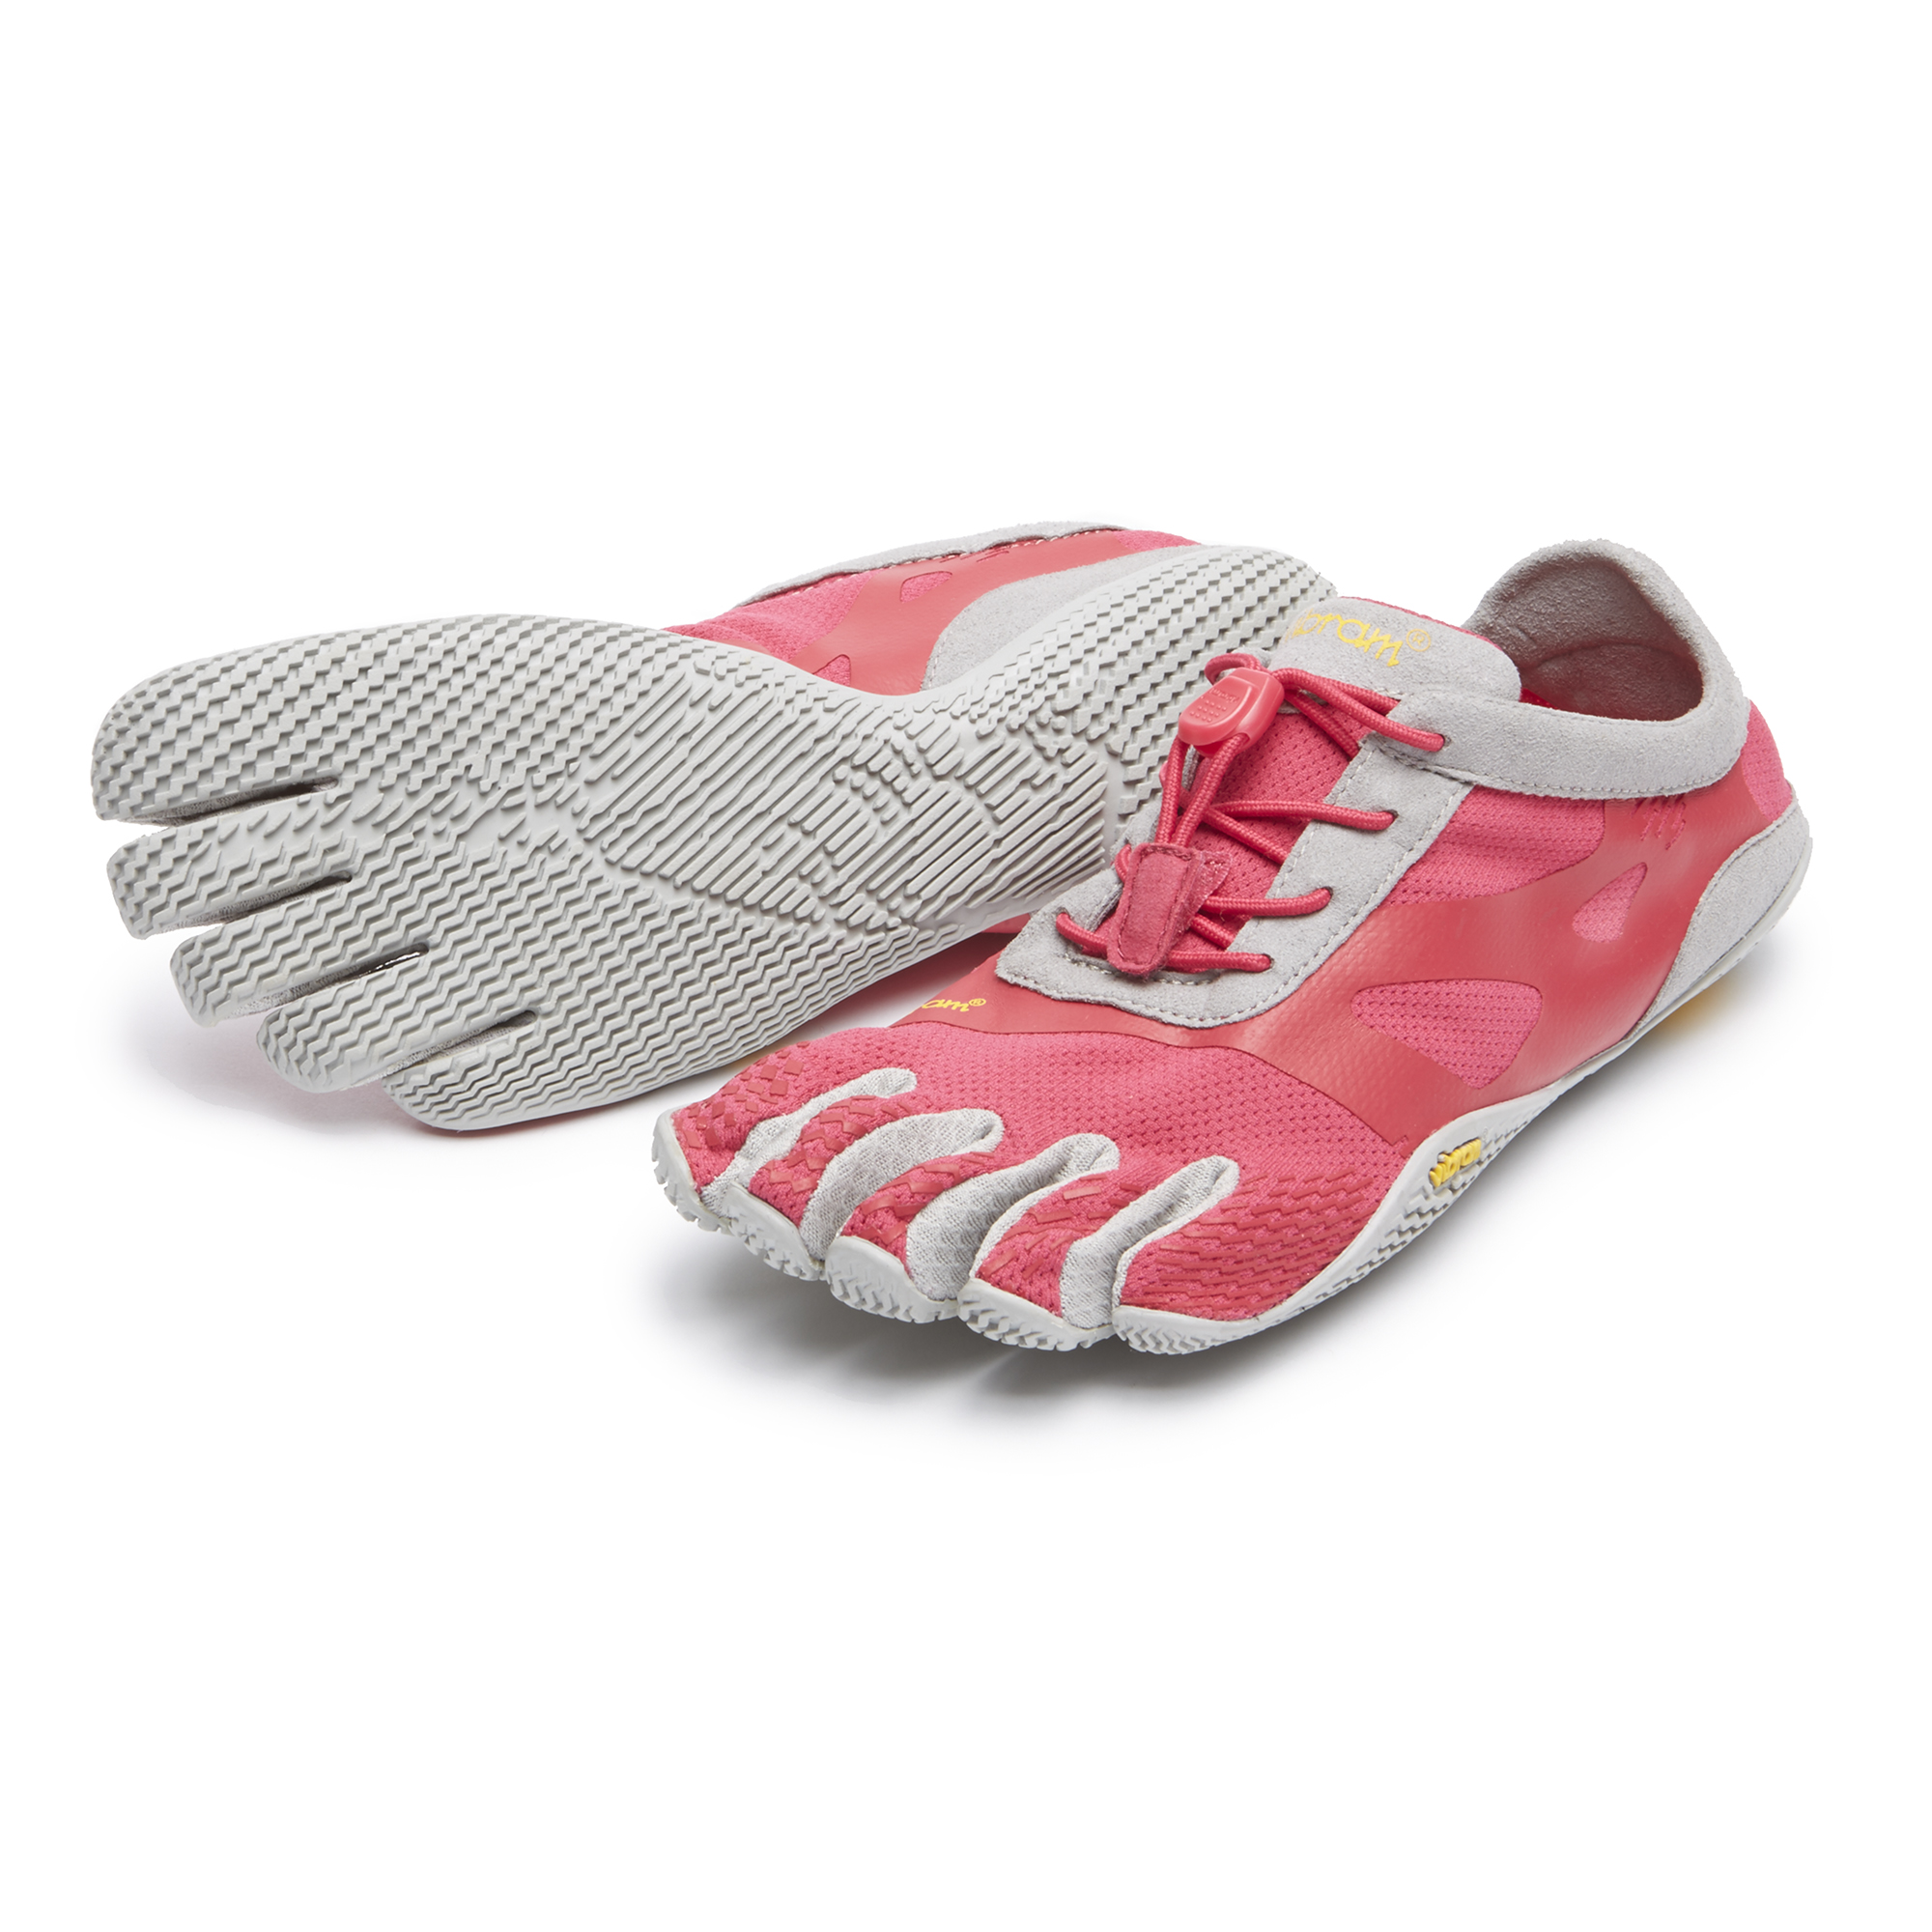 7.5/8 UK|Grey Taupe Women's Fitness and Wellbeing Details about   Vibram Five Fingers Kso 